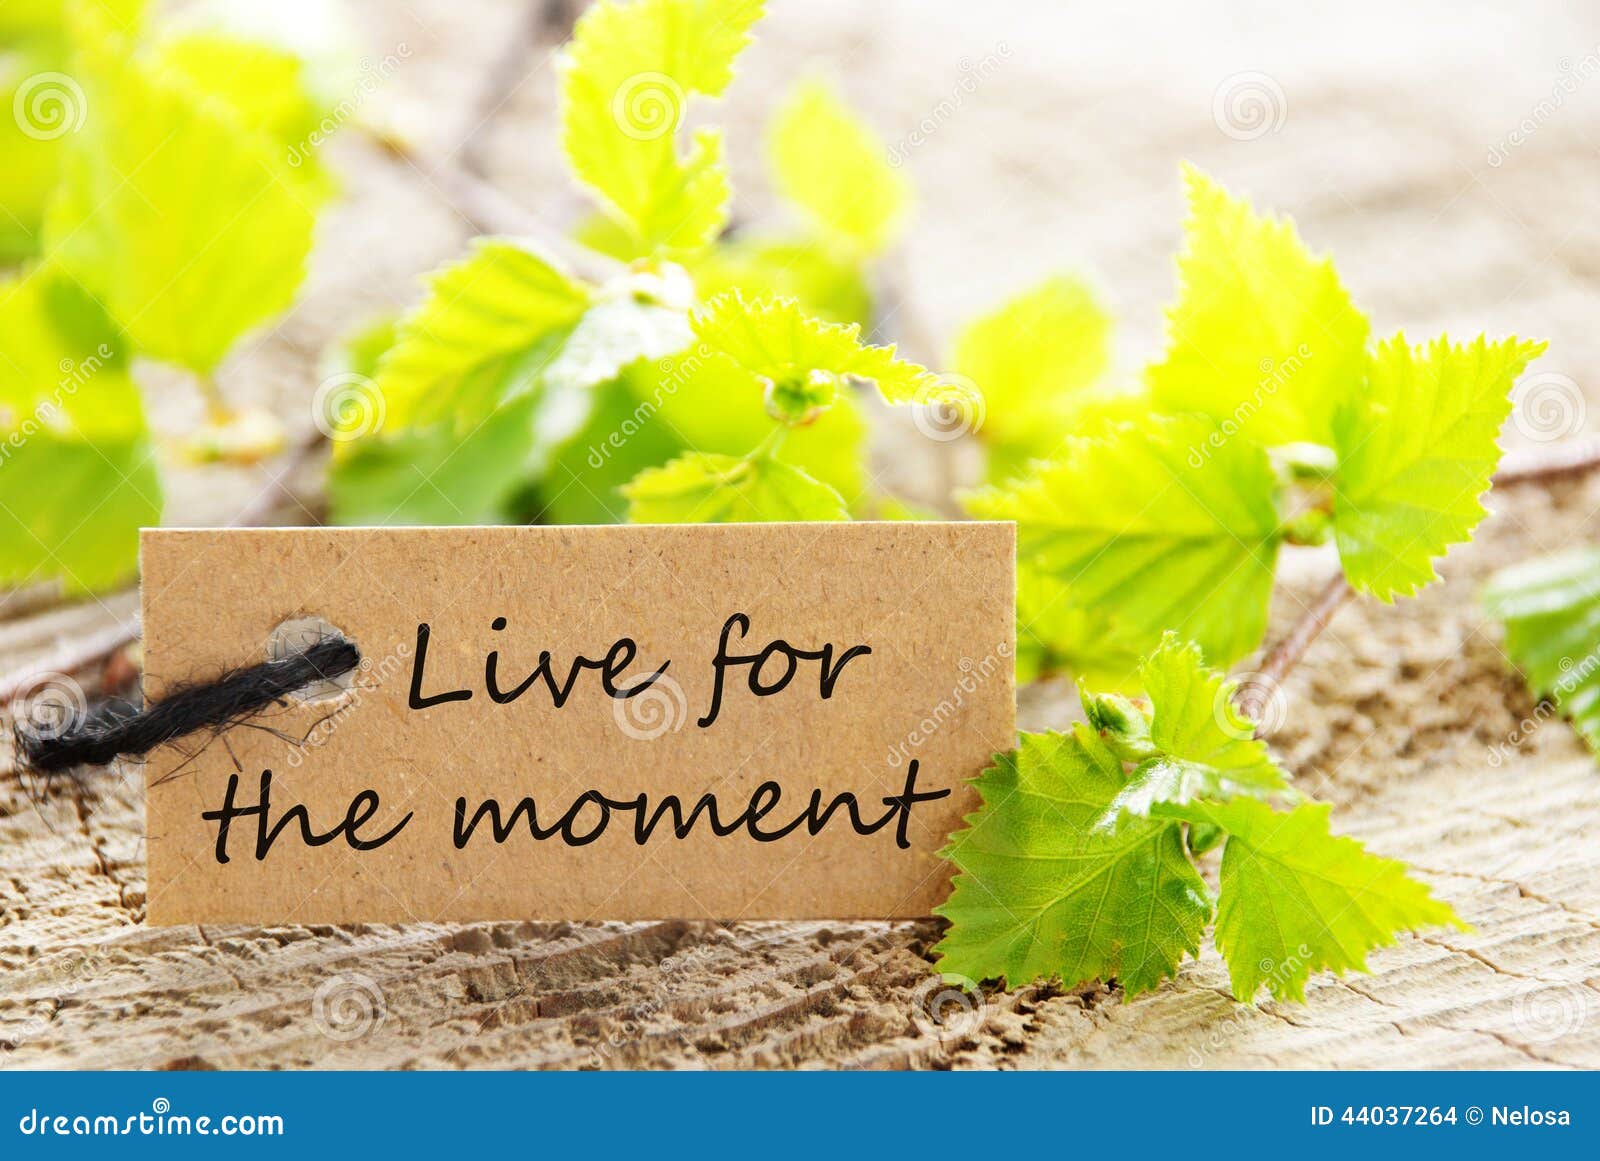 live for the moment label